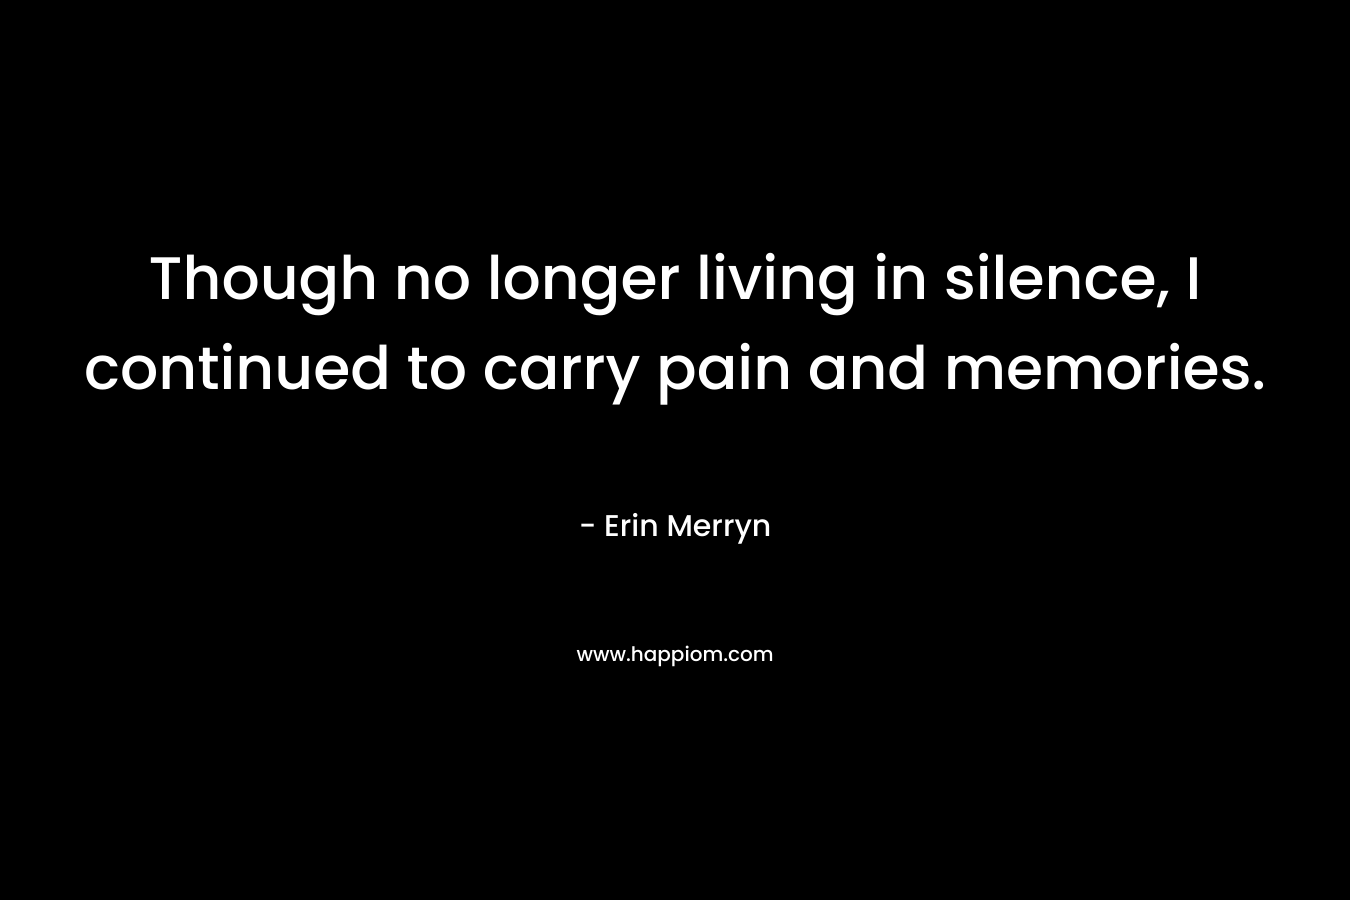 Though no longer living in silence, I continued to carry pain and memories.